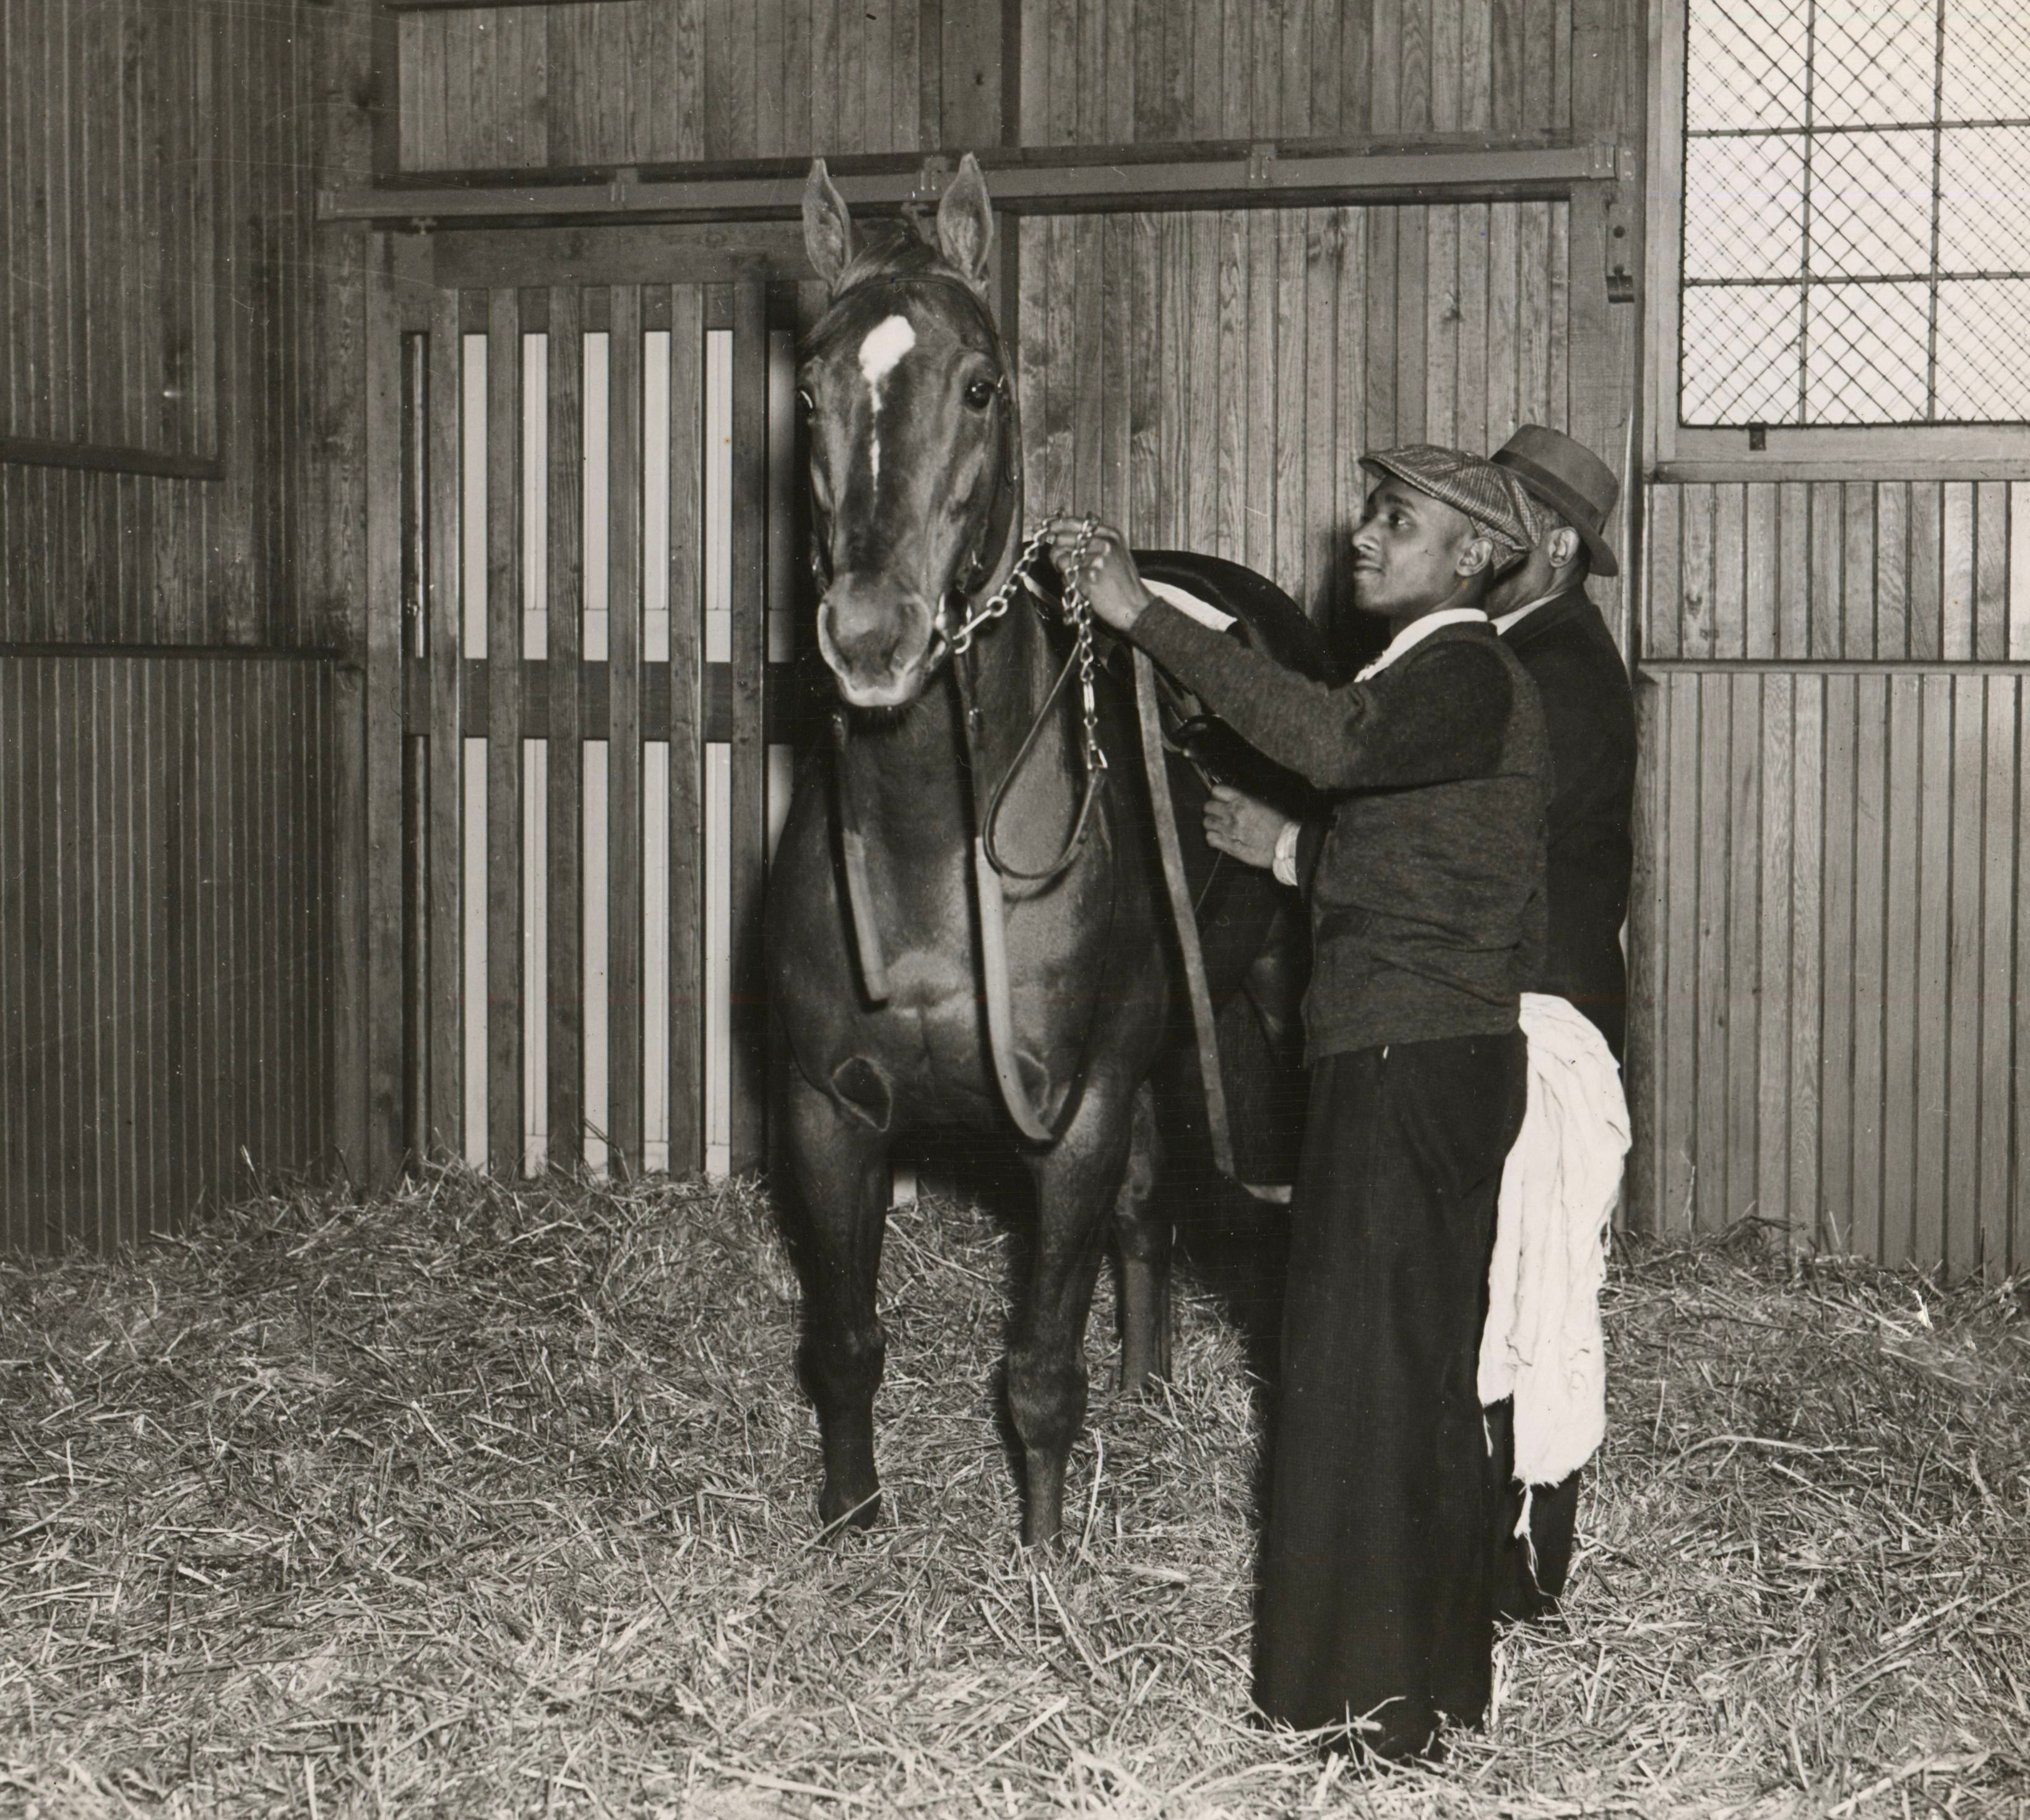 Man o' War being saddled in his stall (Wide World Photos/Museum Collection)